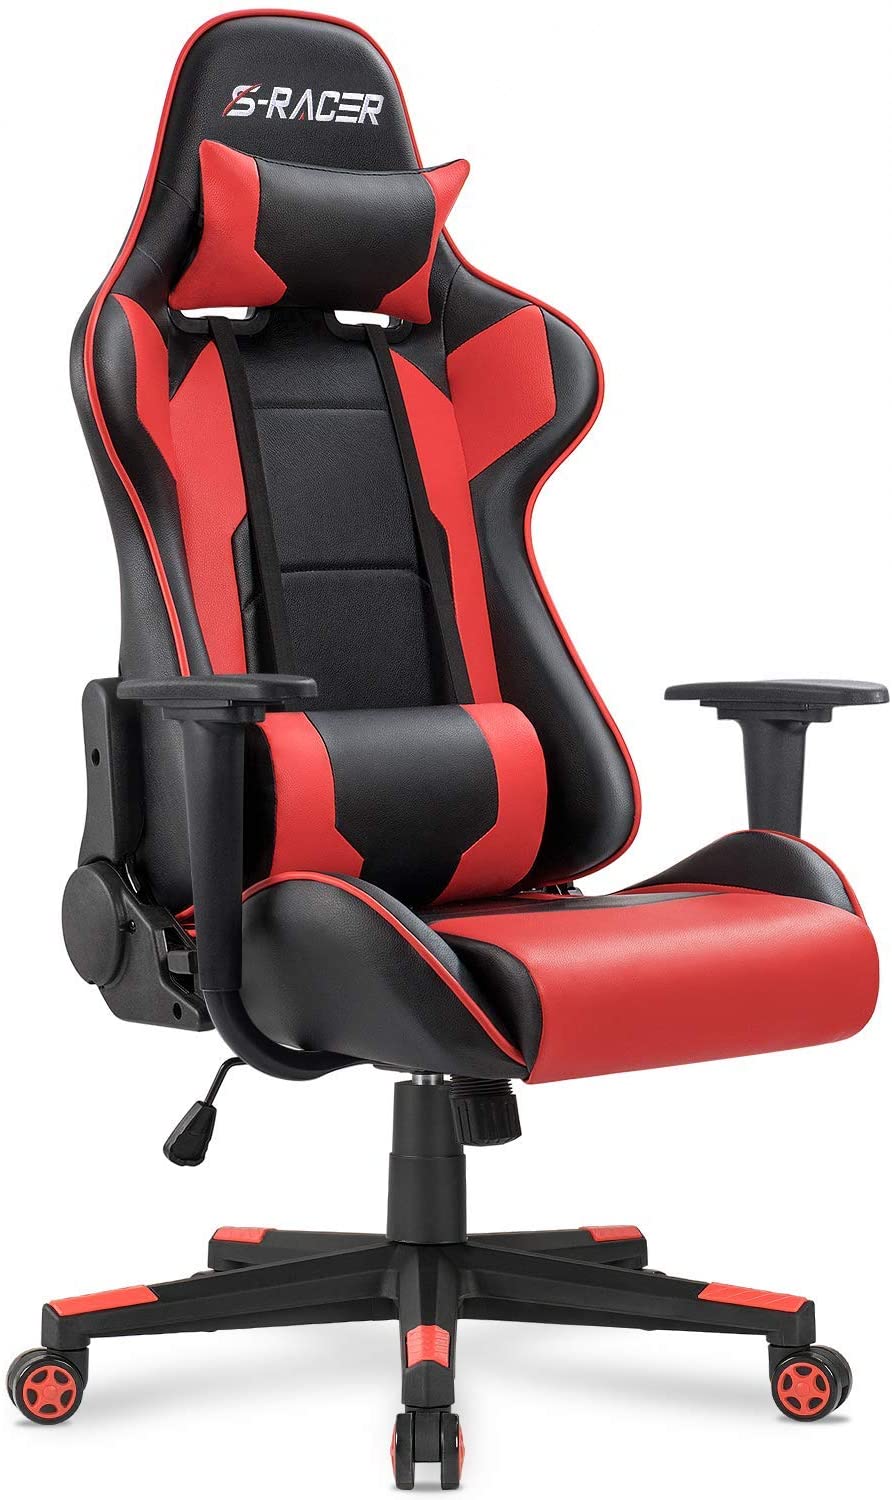 Gaming Chair Office Chair High Back Computer Chair PU Leather Desk Chair PC Racing Executive Ergonomic Adjustable Swivel Task Chair with Headrest and Lumbar Support (Red)